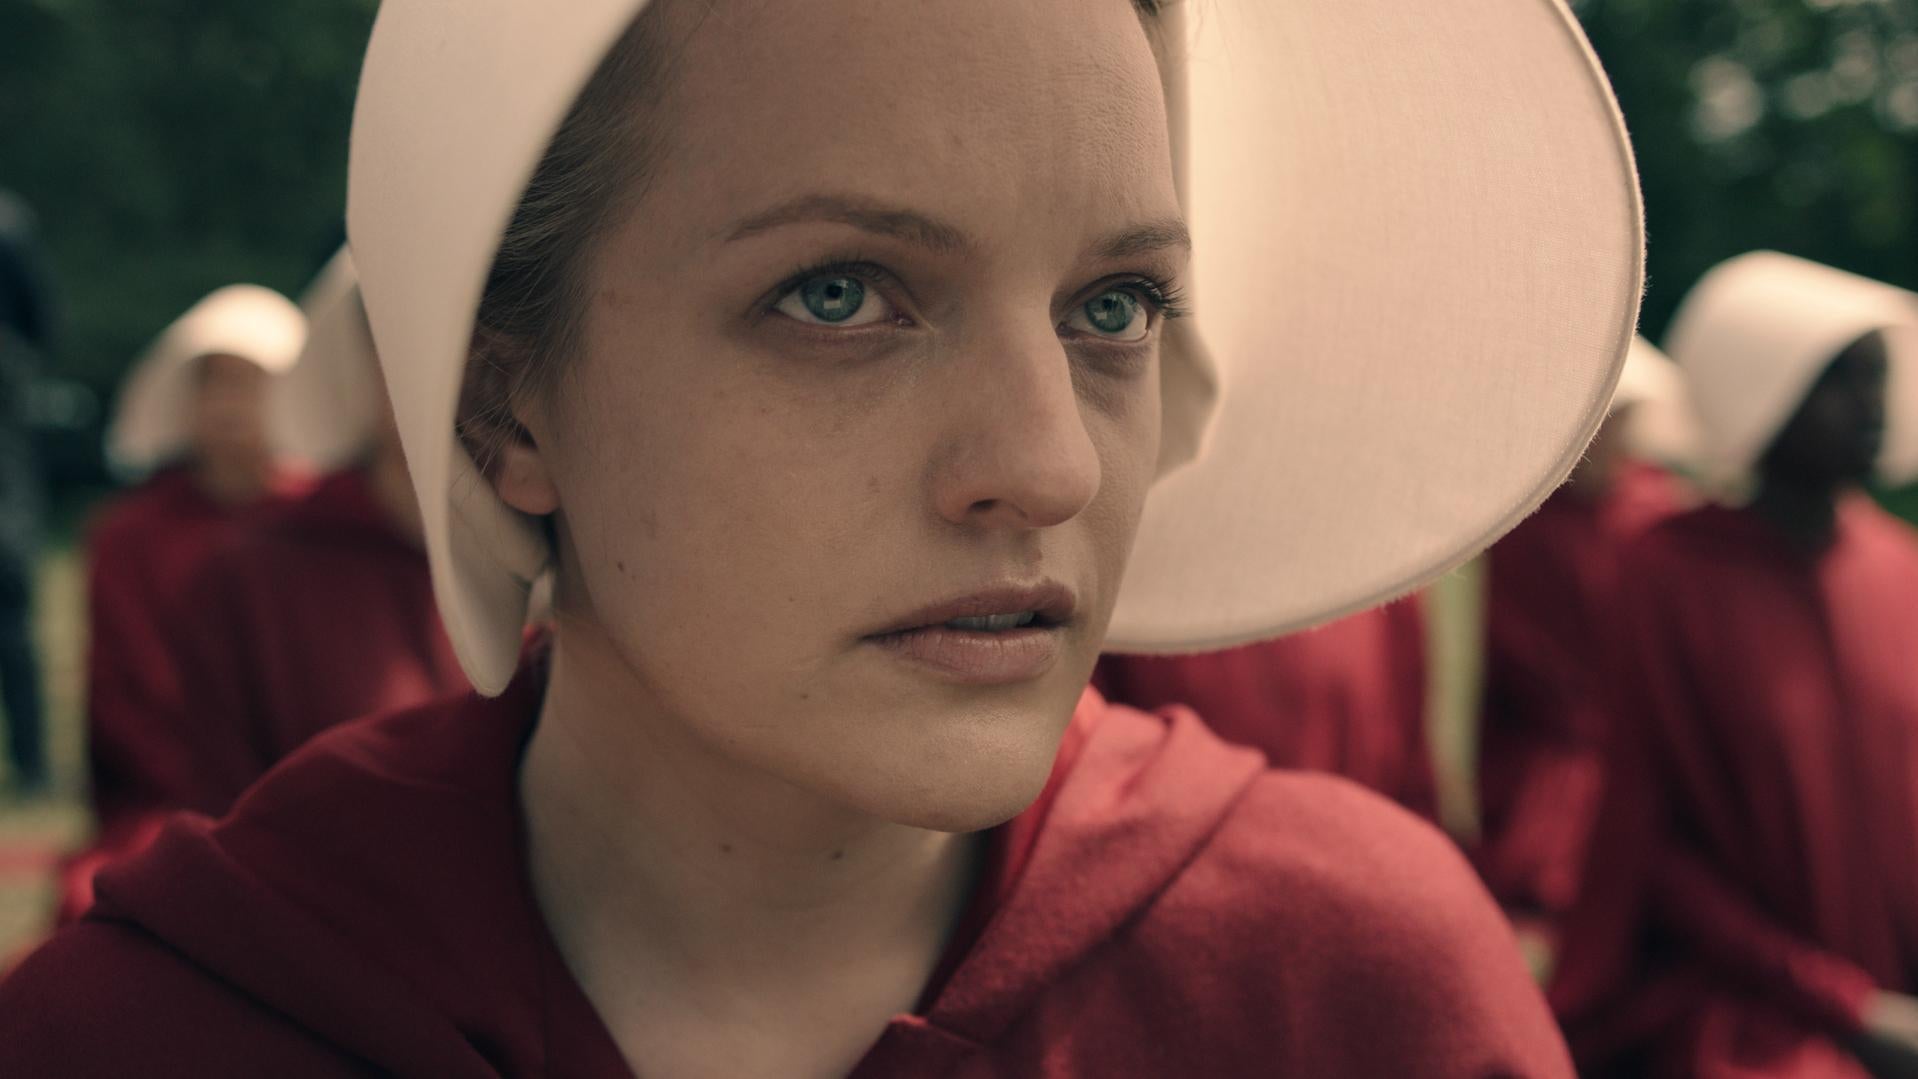 The Handmaid’s Tale: Margaret Atwood once decried science fiction as ‘talking squids in outer space’